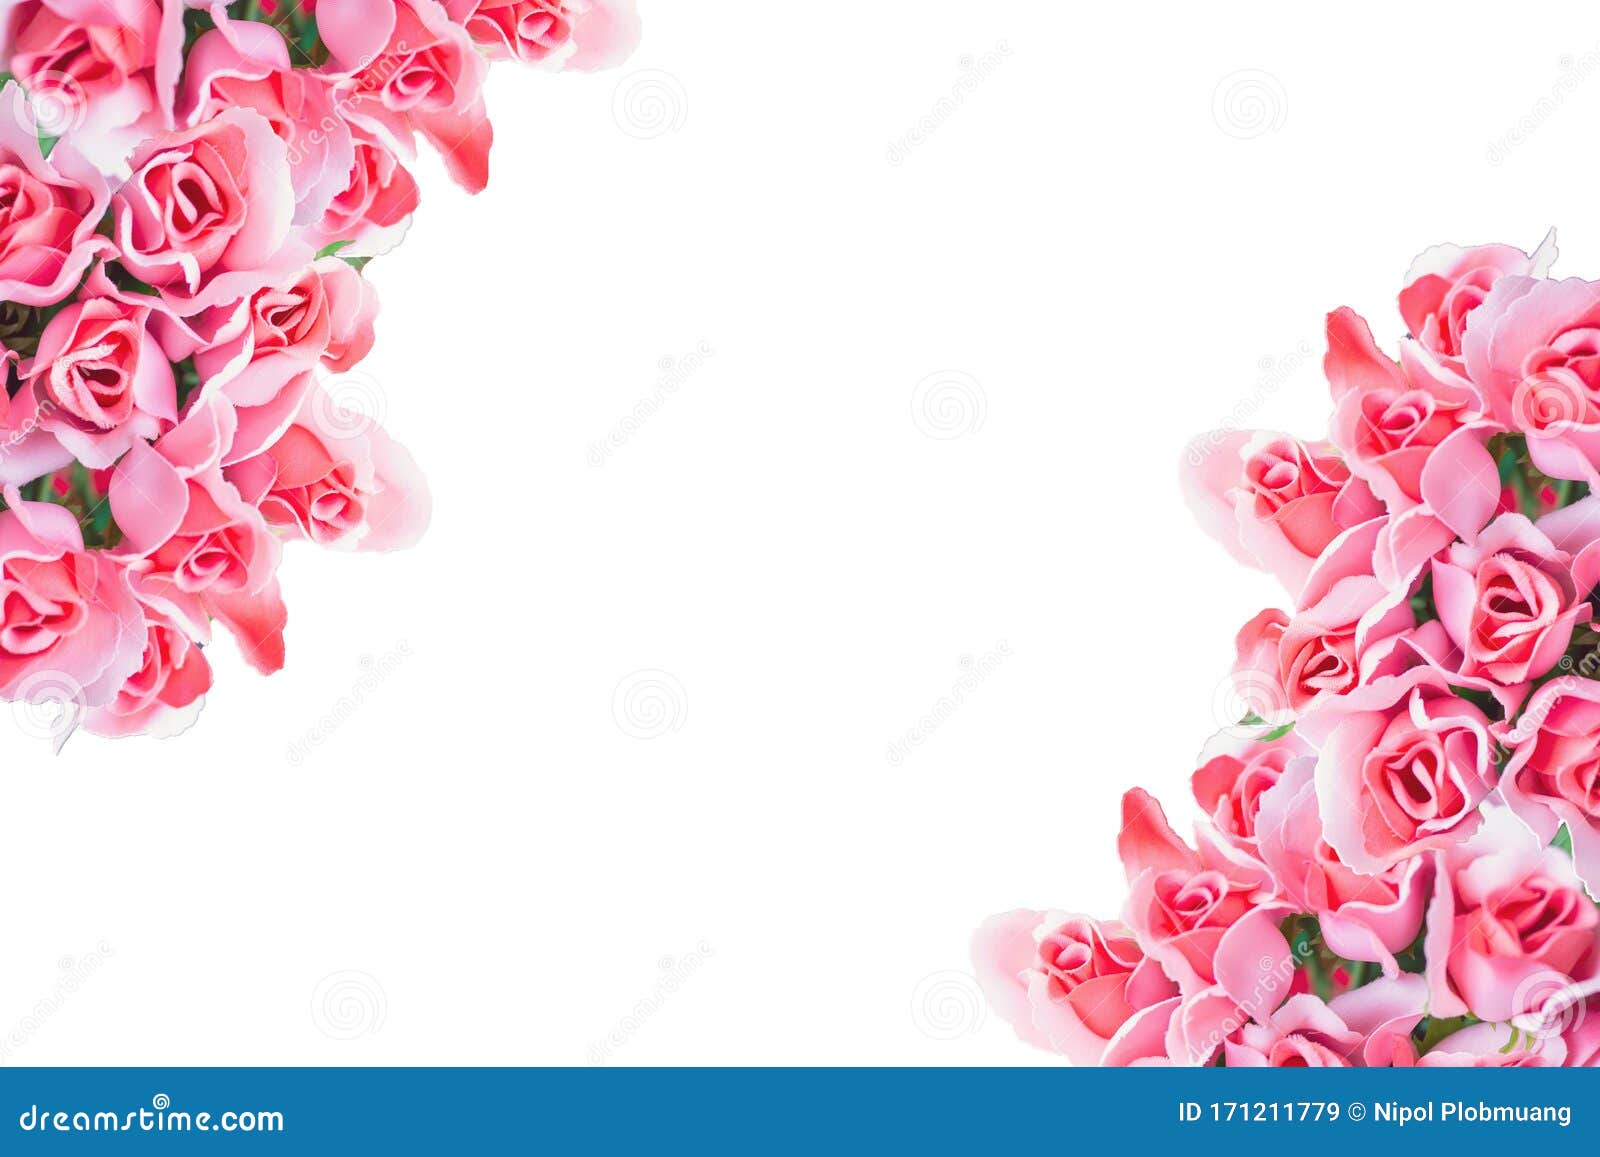 Rose Gold Rose Bouquet On White Background Flowers Background Stock Image Image Of Bouquet Market 171211779